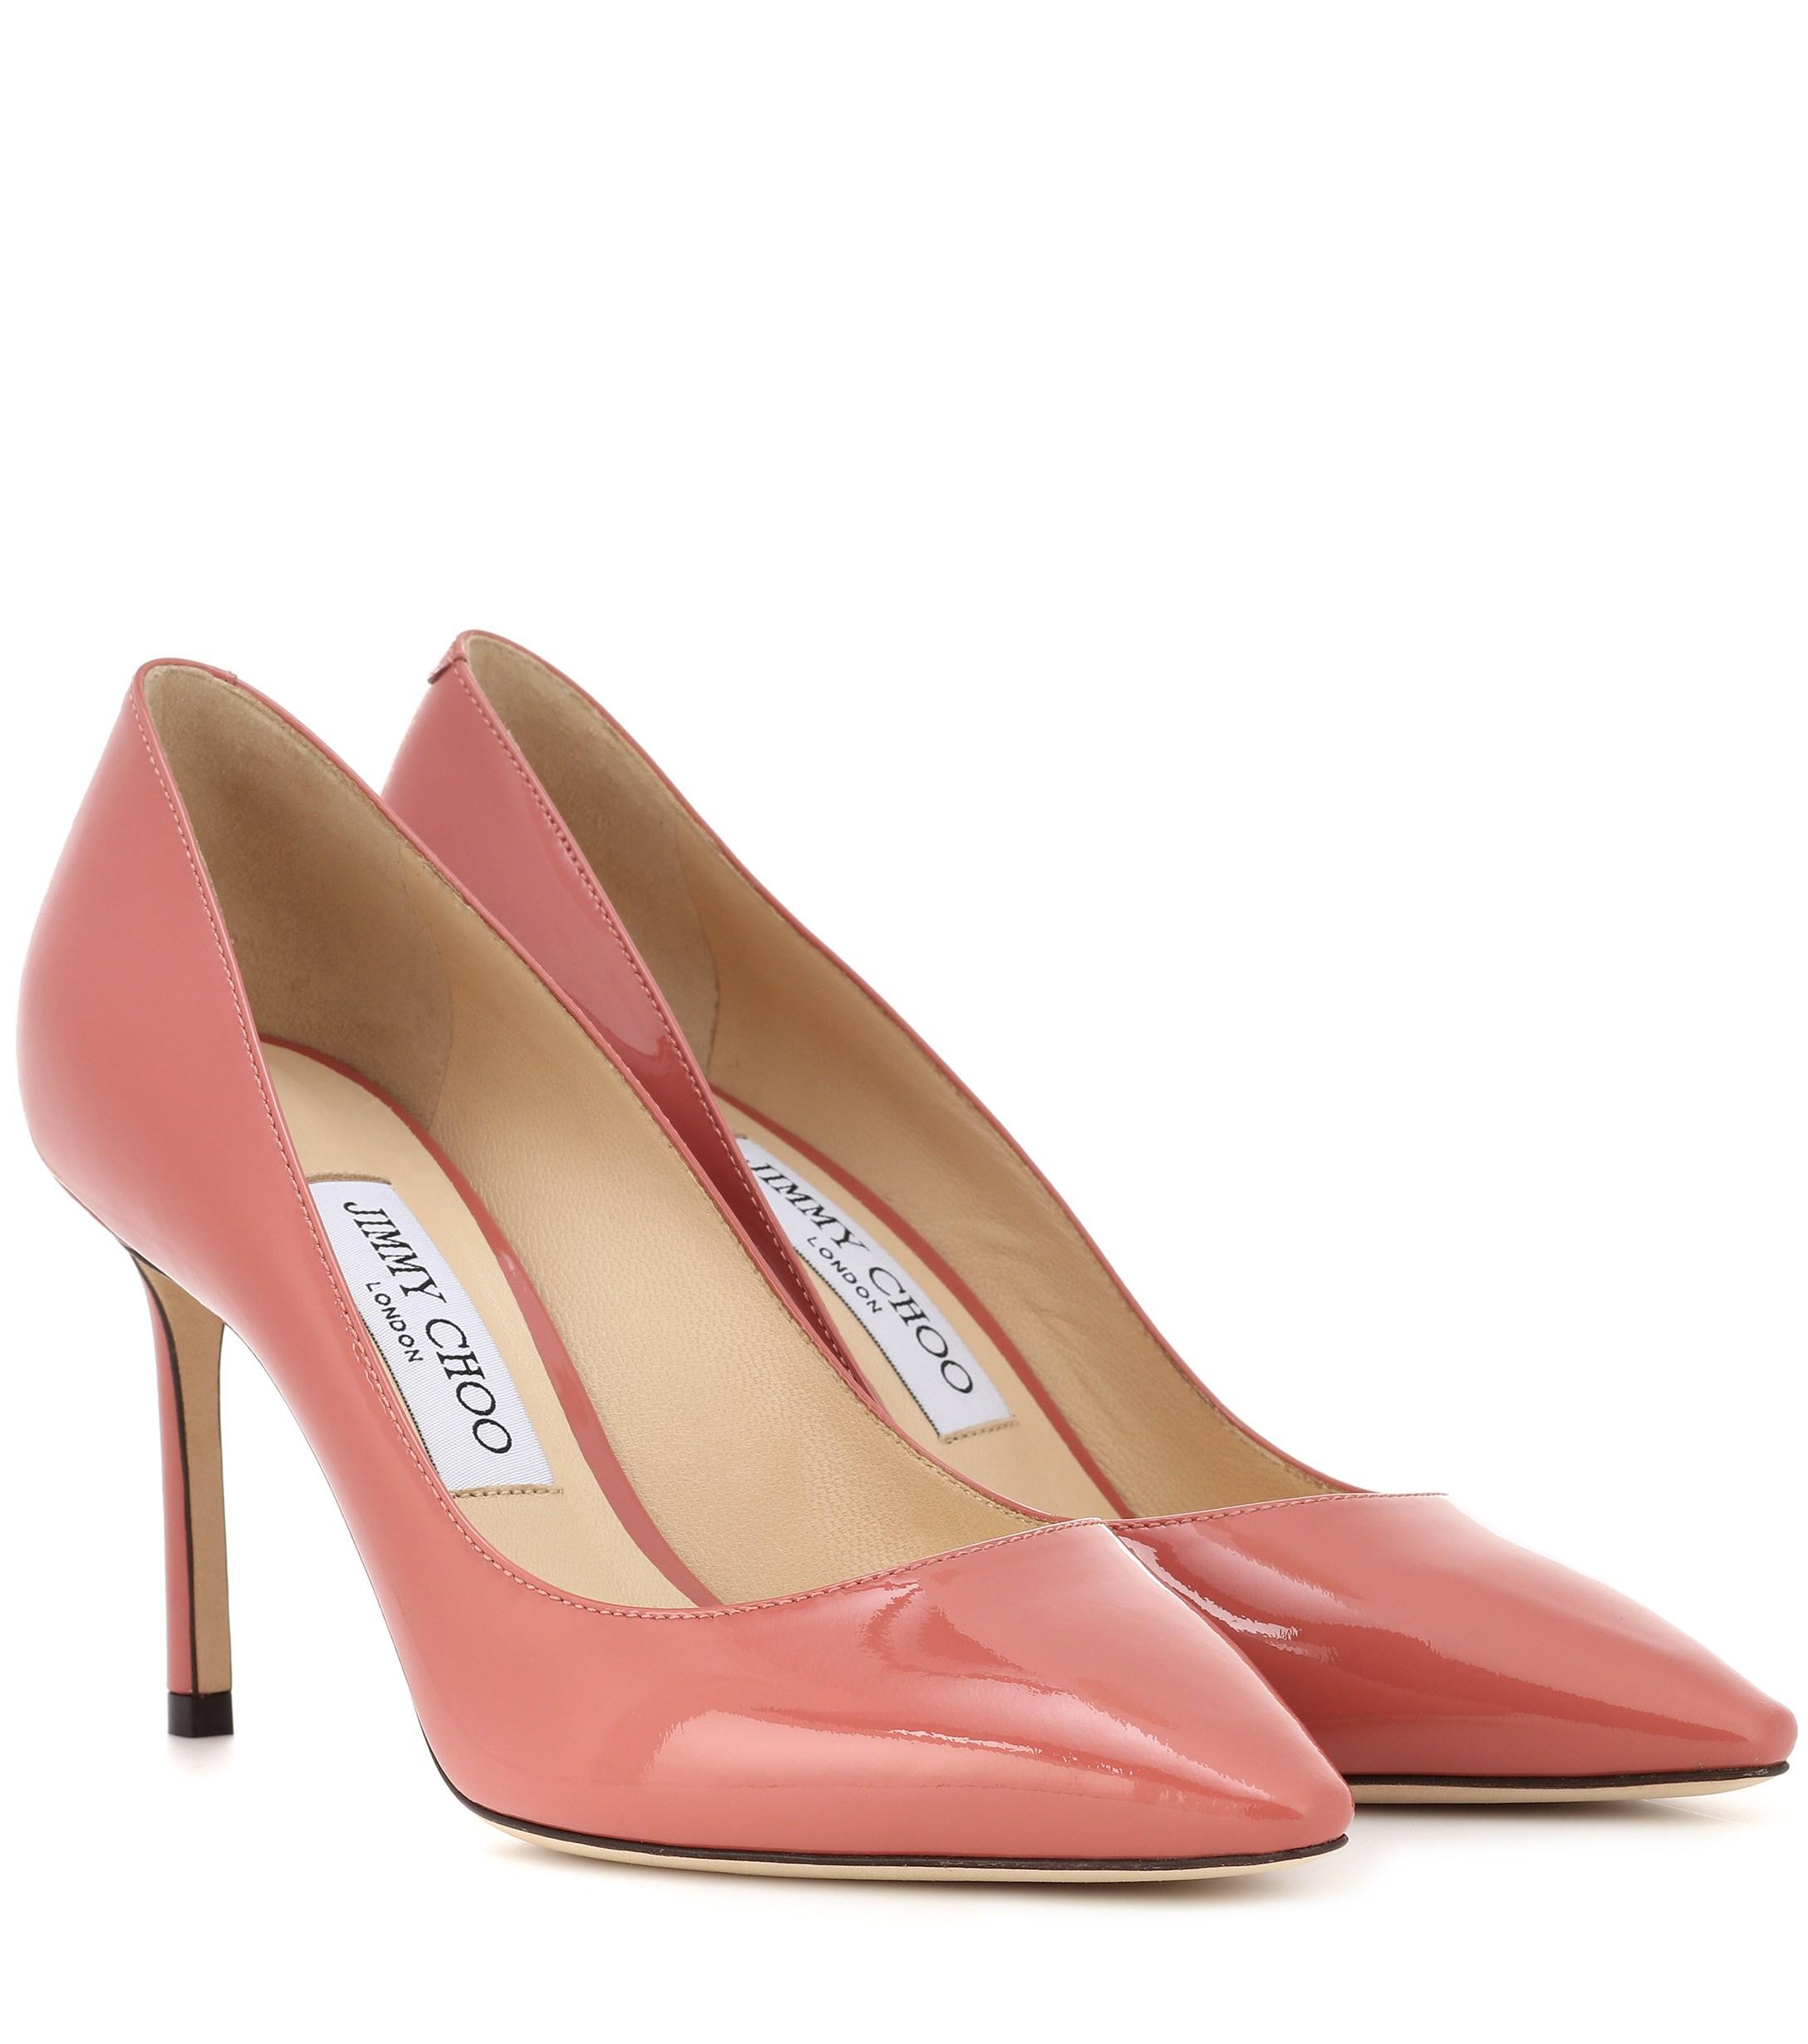 Jimmy Choo Romy 85 Patent Leather Pumps in Pink - Lyst